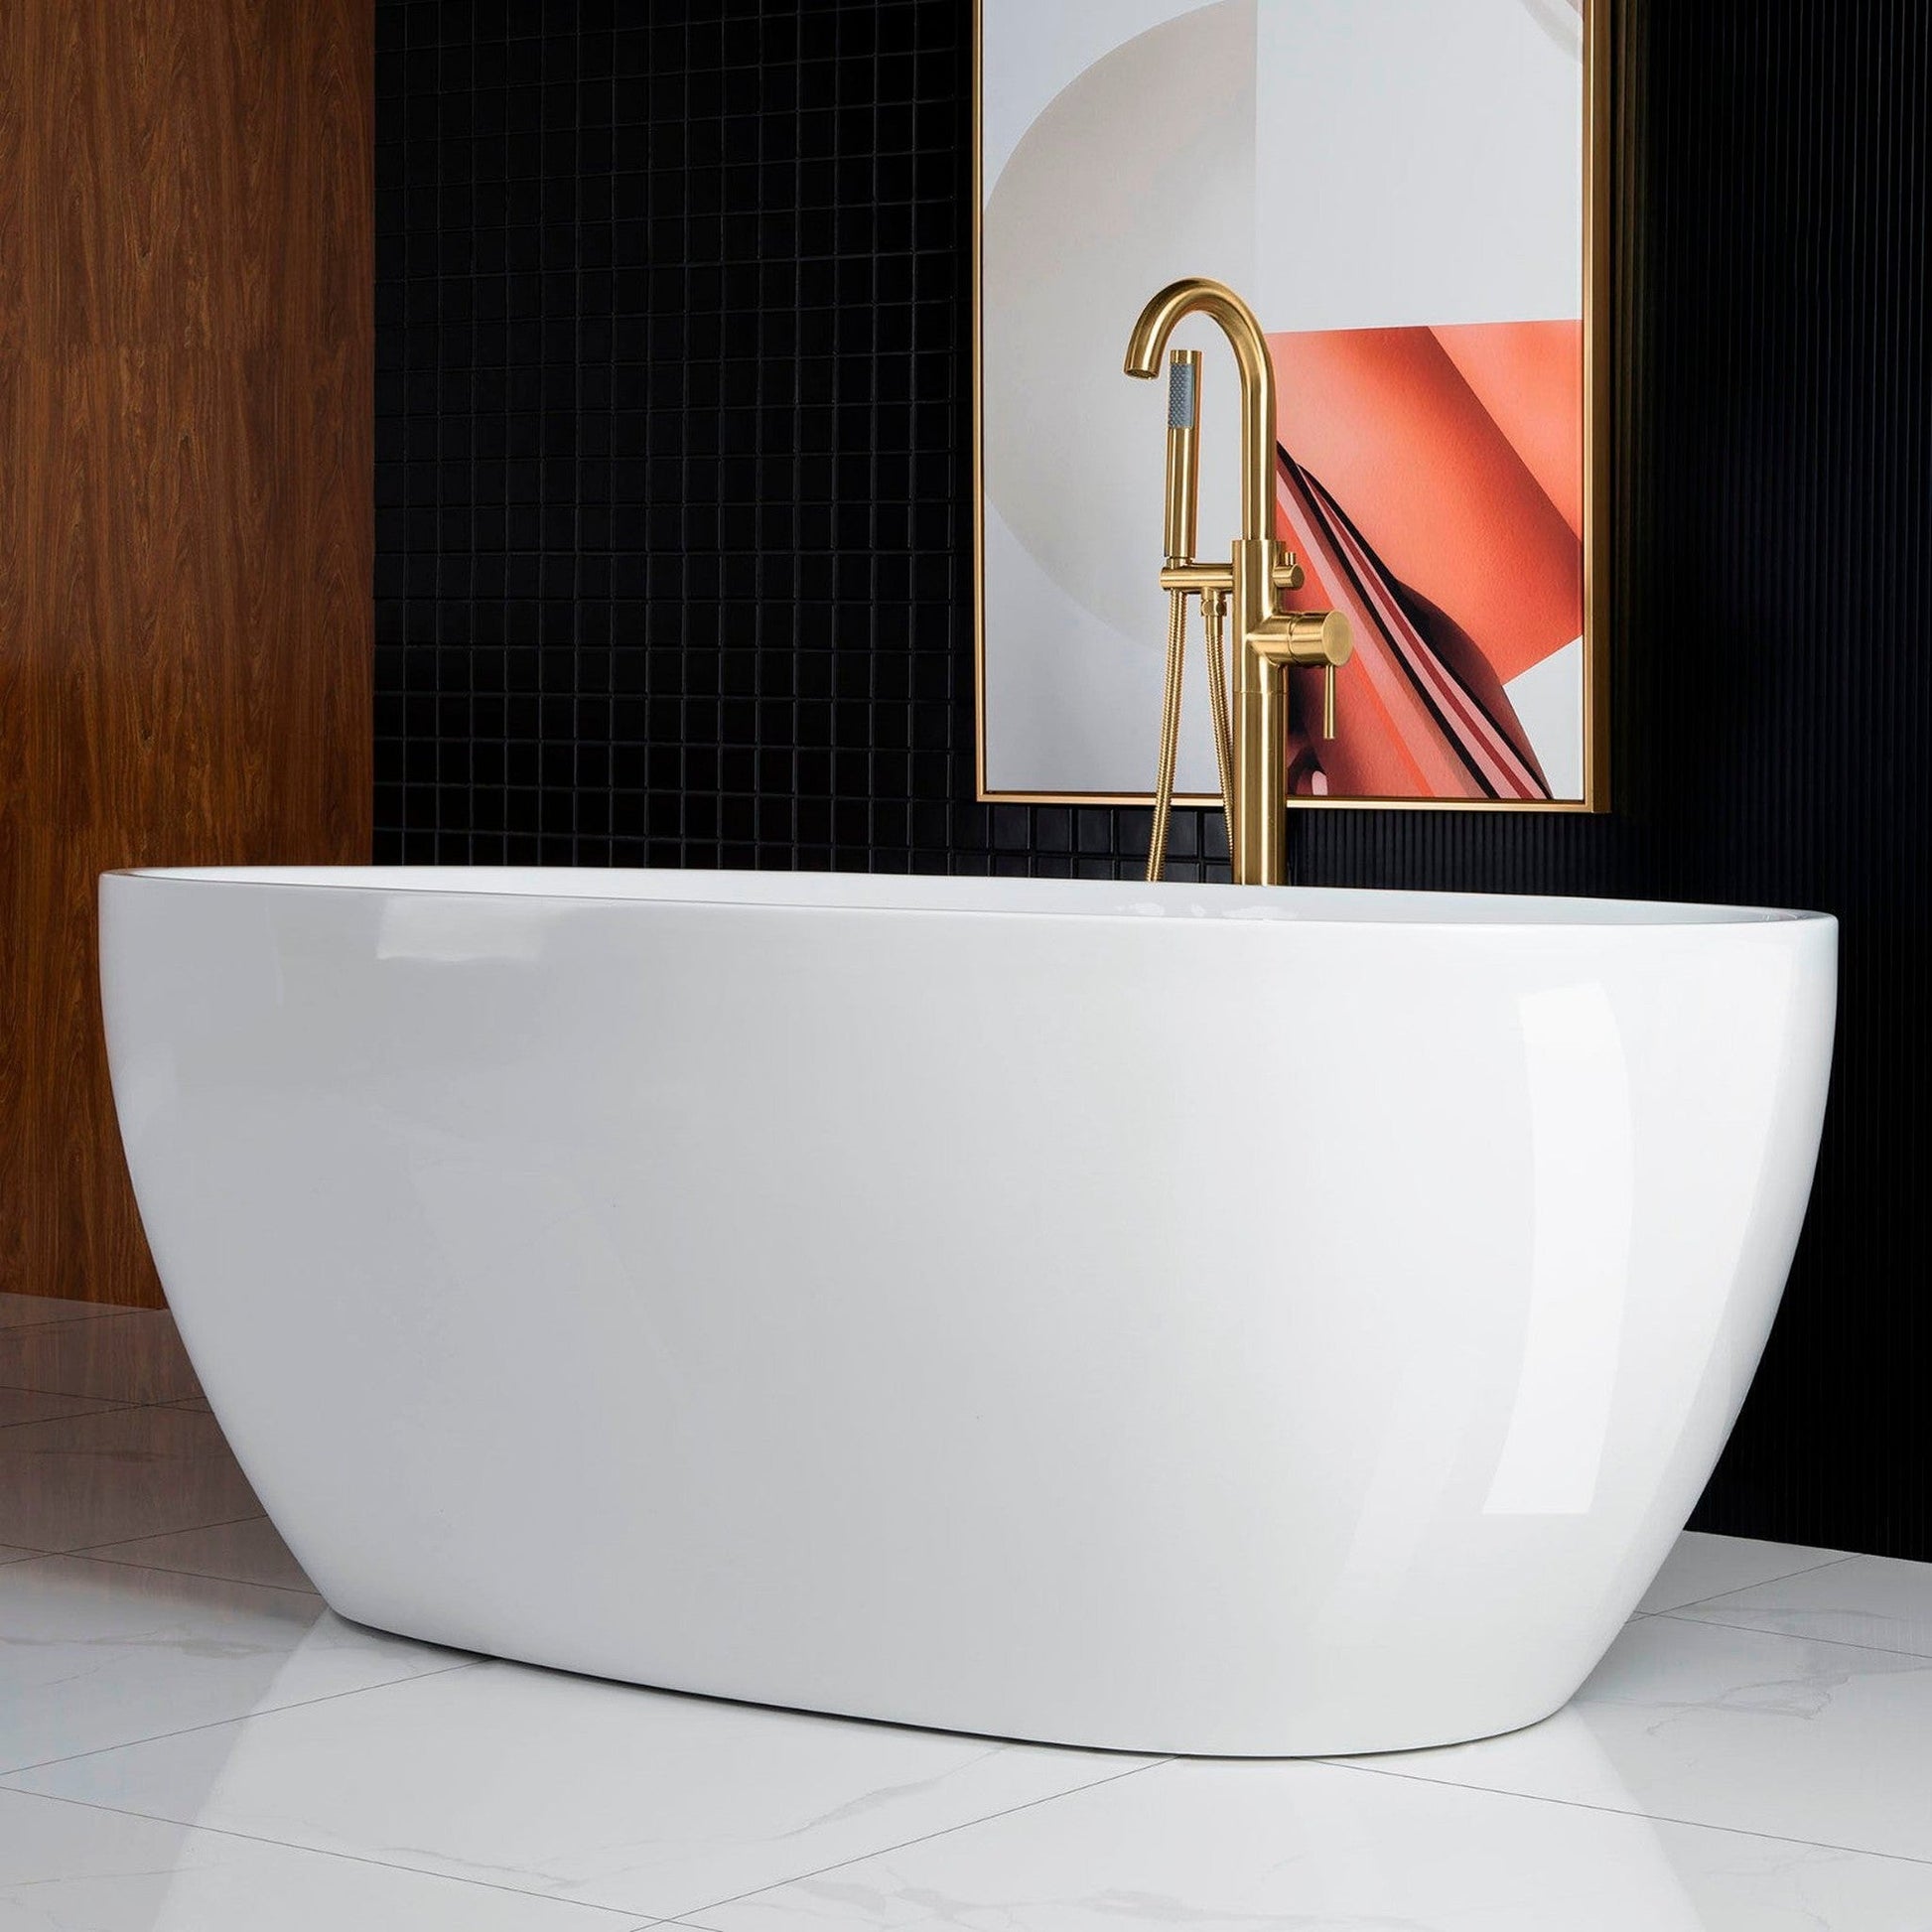 WoodBridge B0028 67" White Acrylic Freestanding Soaking Bathtub With Brushed Gold Drain, Overflow, F0073BGVT Tub Filler and Caddy Tray